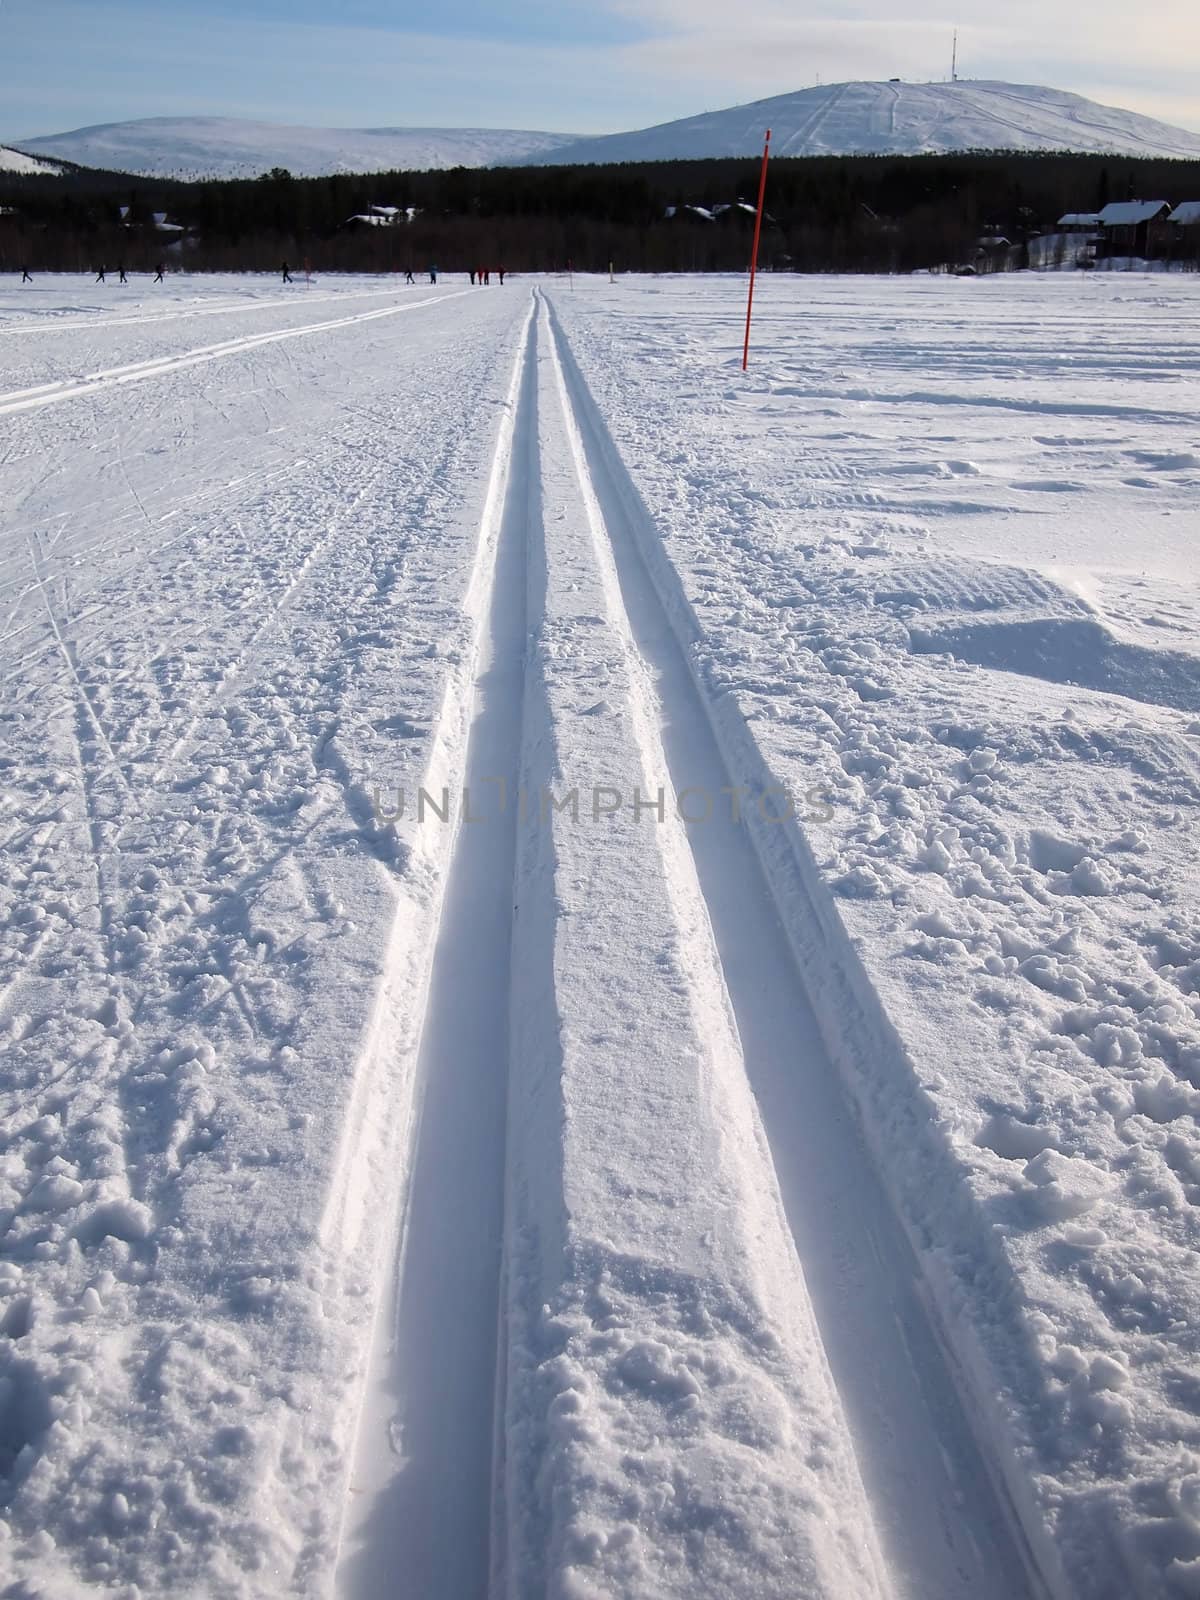 Cross-country tracks on a frozen lake in Lapland.